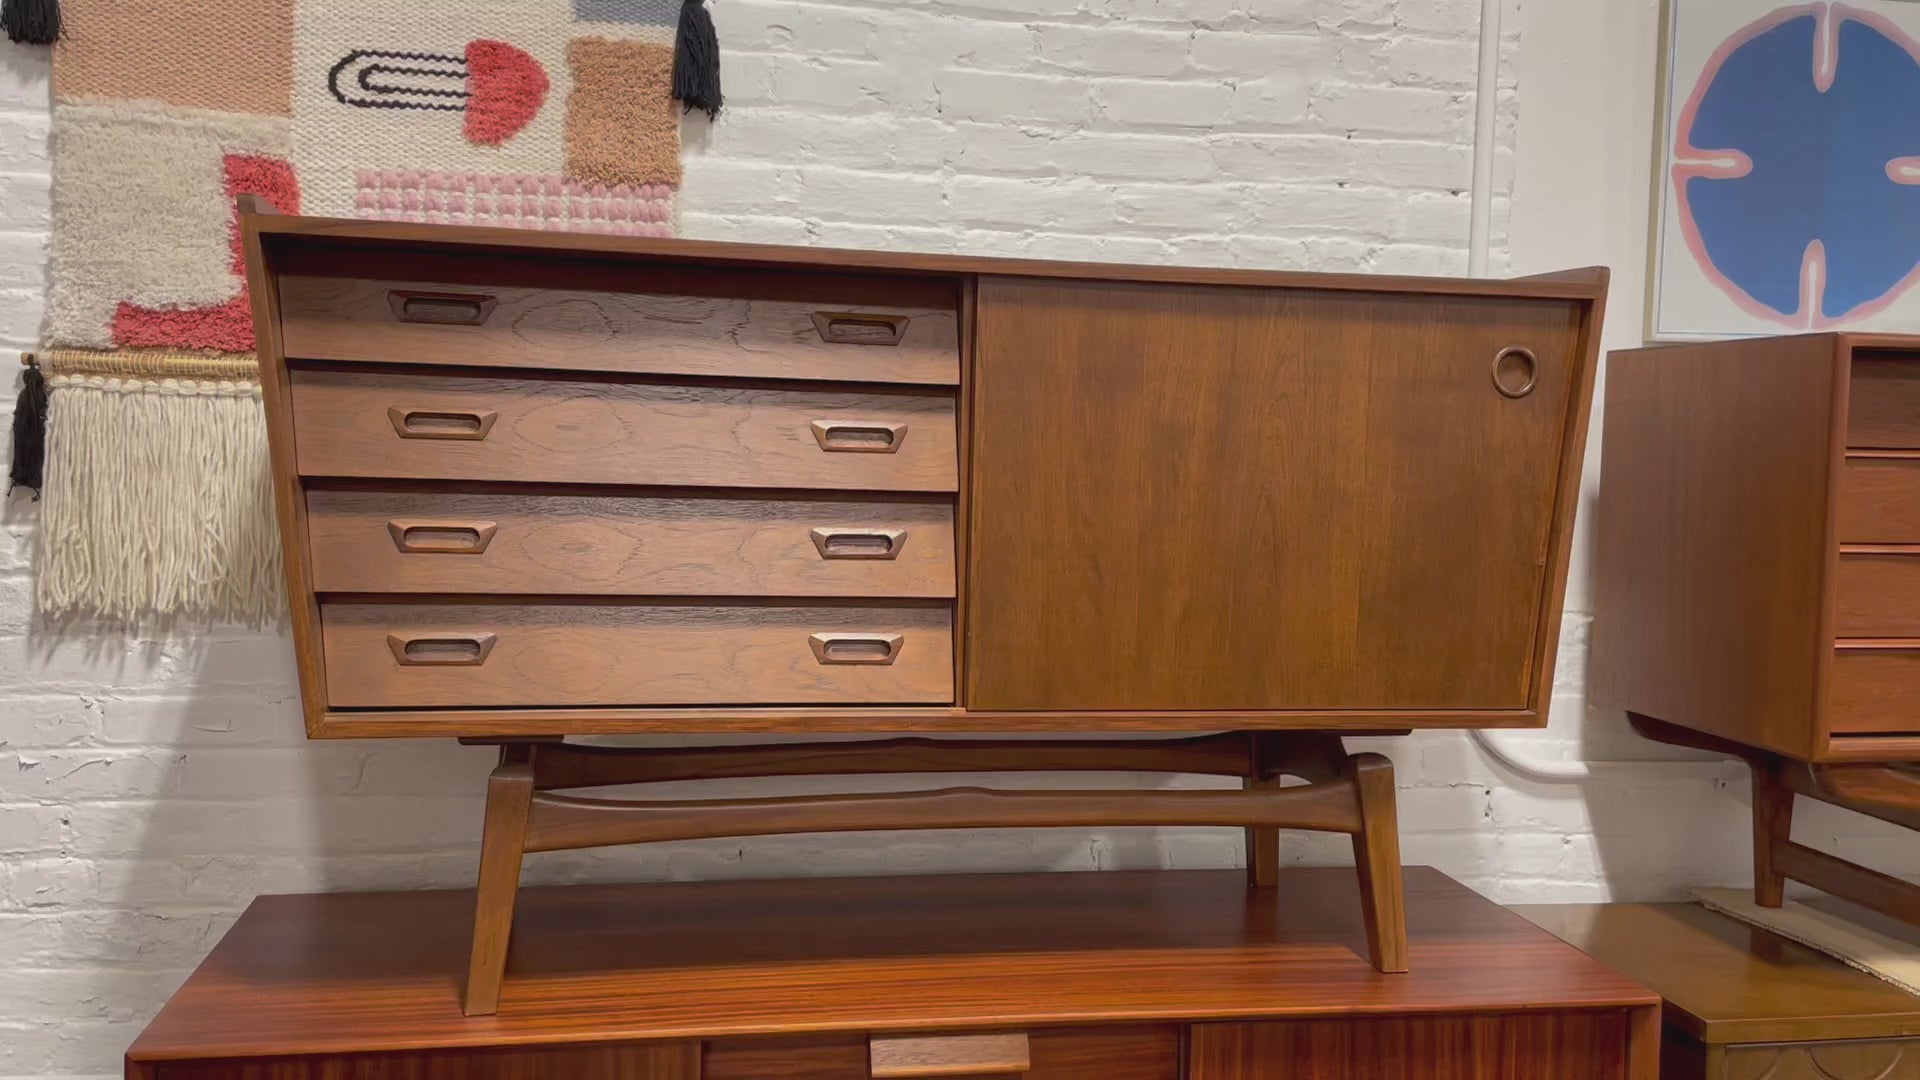 Apartment Sized DANISH Mid Century MODERN styled CREDENZA / Media Stand / Sideboard